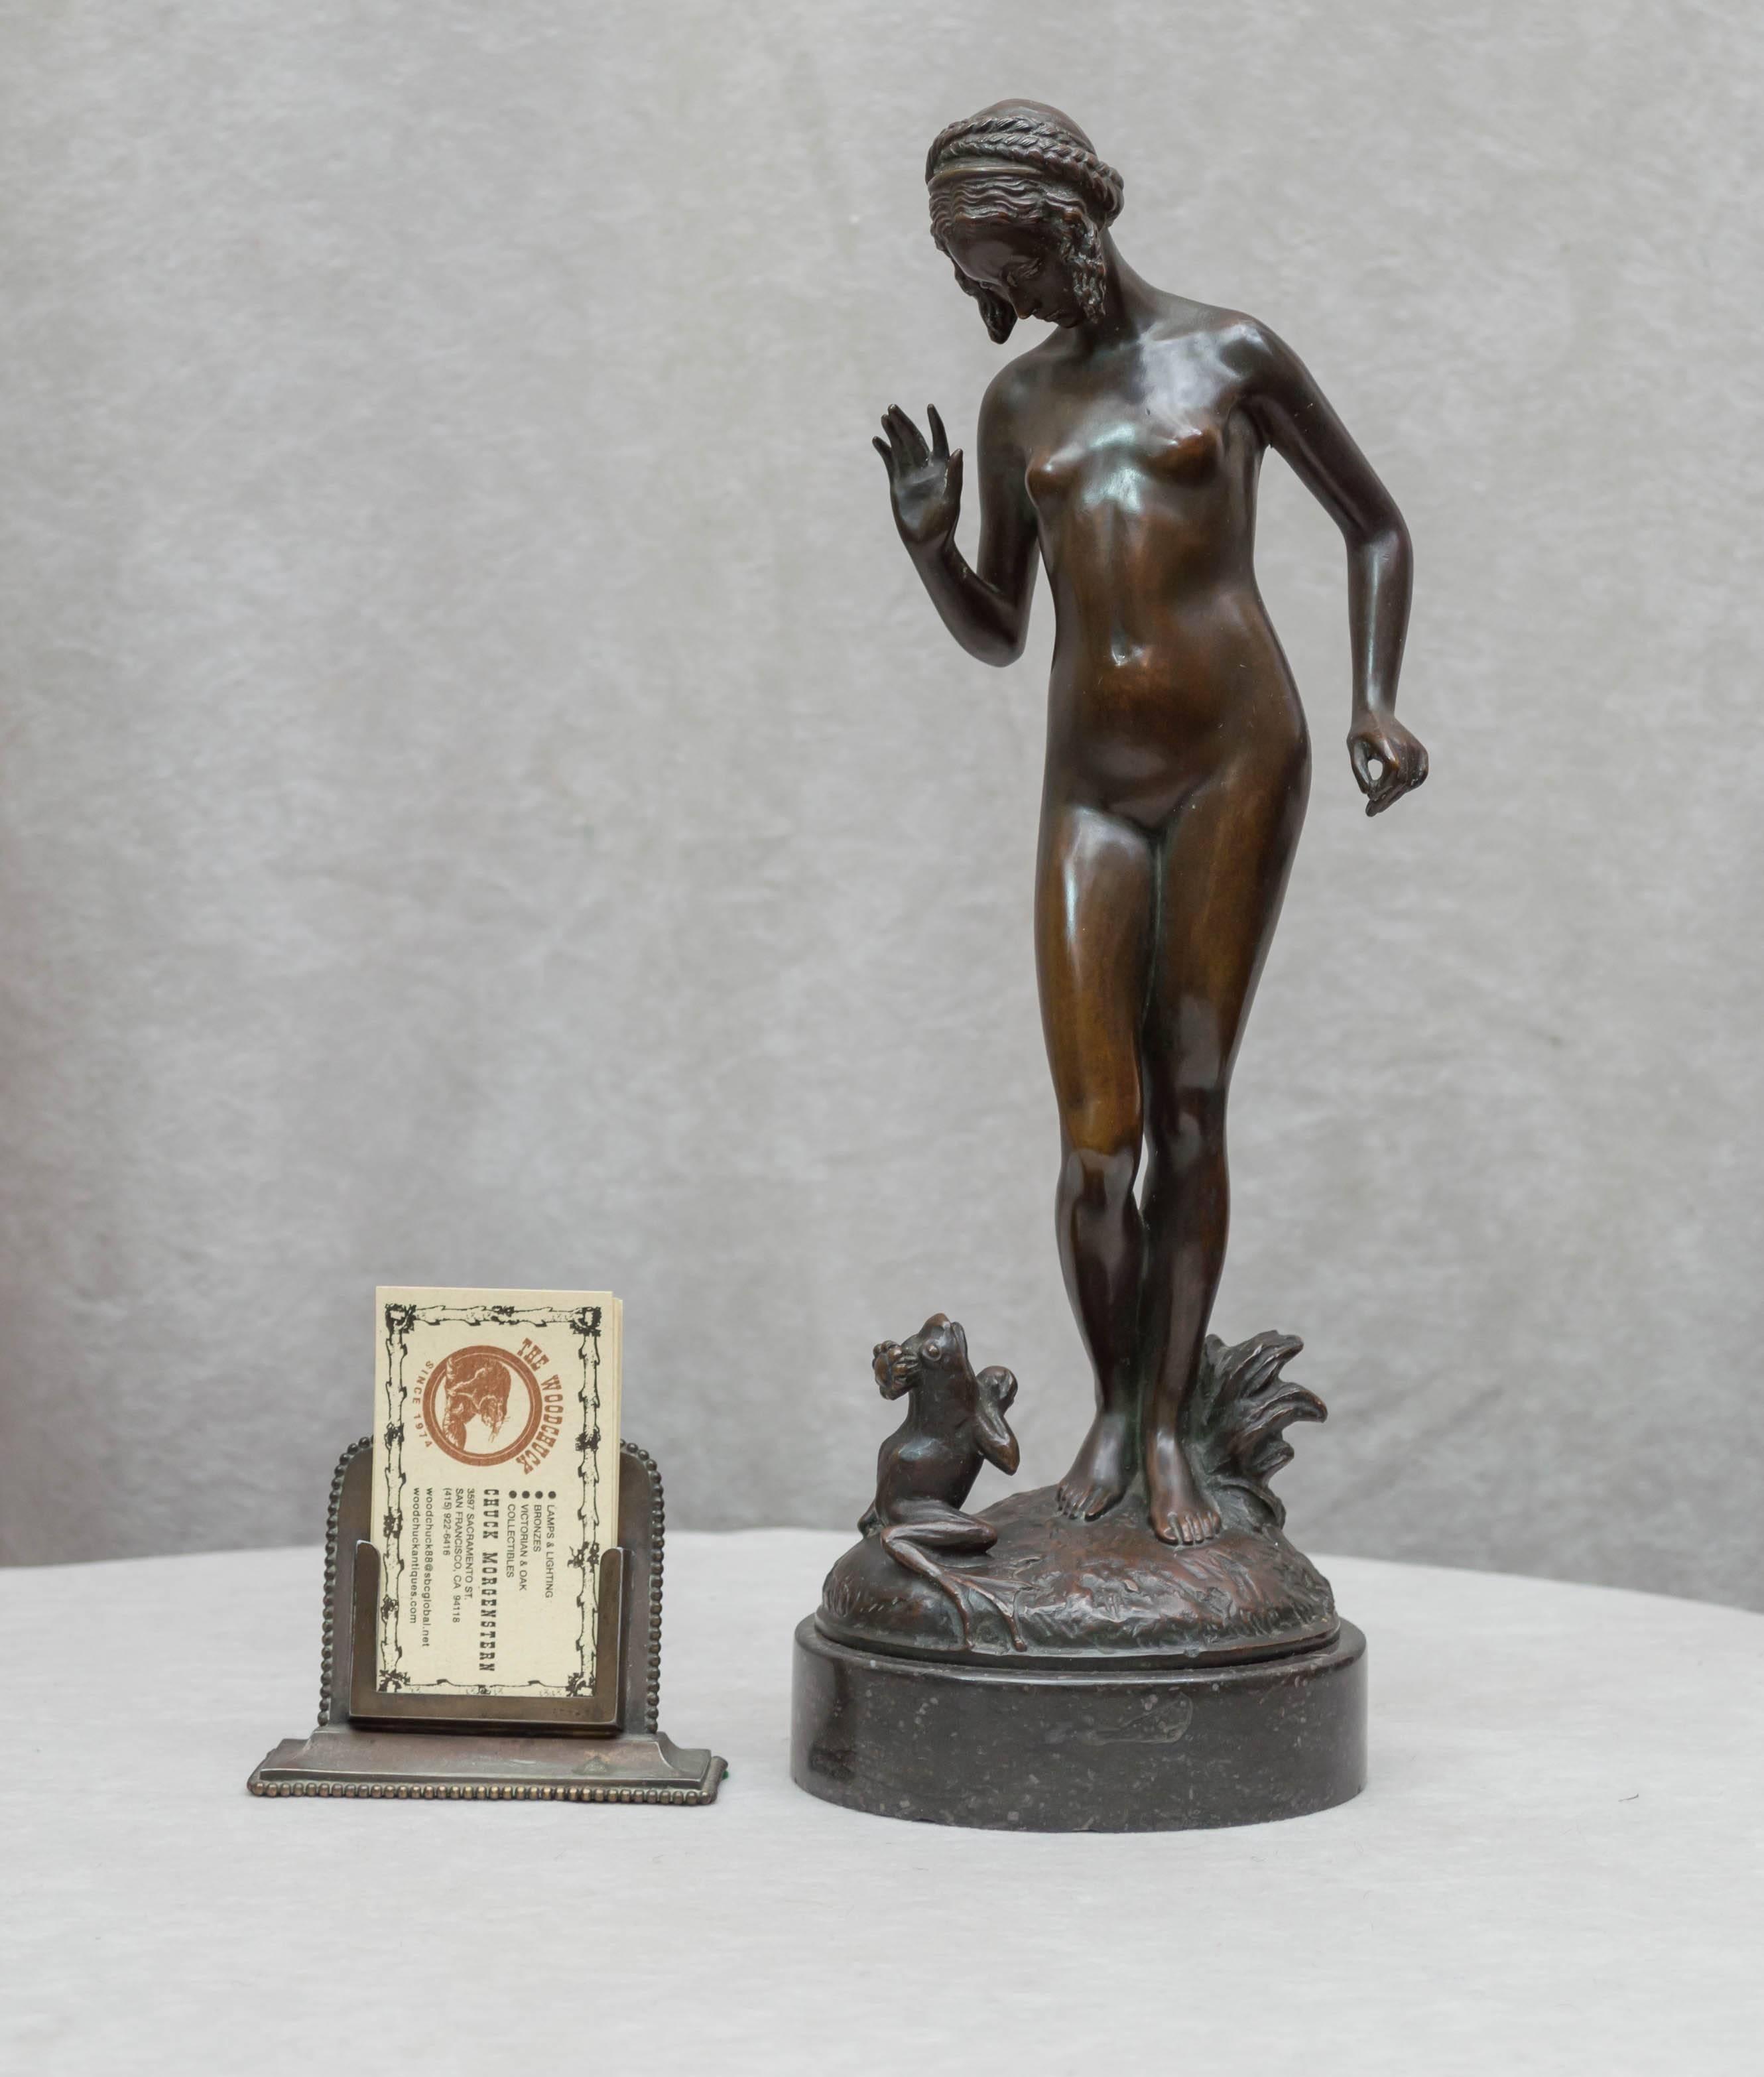 We are always looking for the unusual and the whimsical. Here we have both. The beautiful nude maiden is standing there while the little frog with the crown waits below, I suppose hoping for a kiss to turn into a prince. Fine detail and patina make